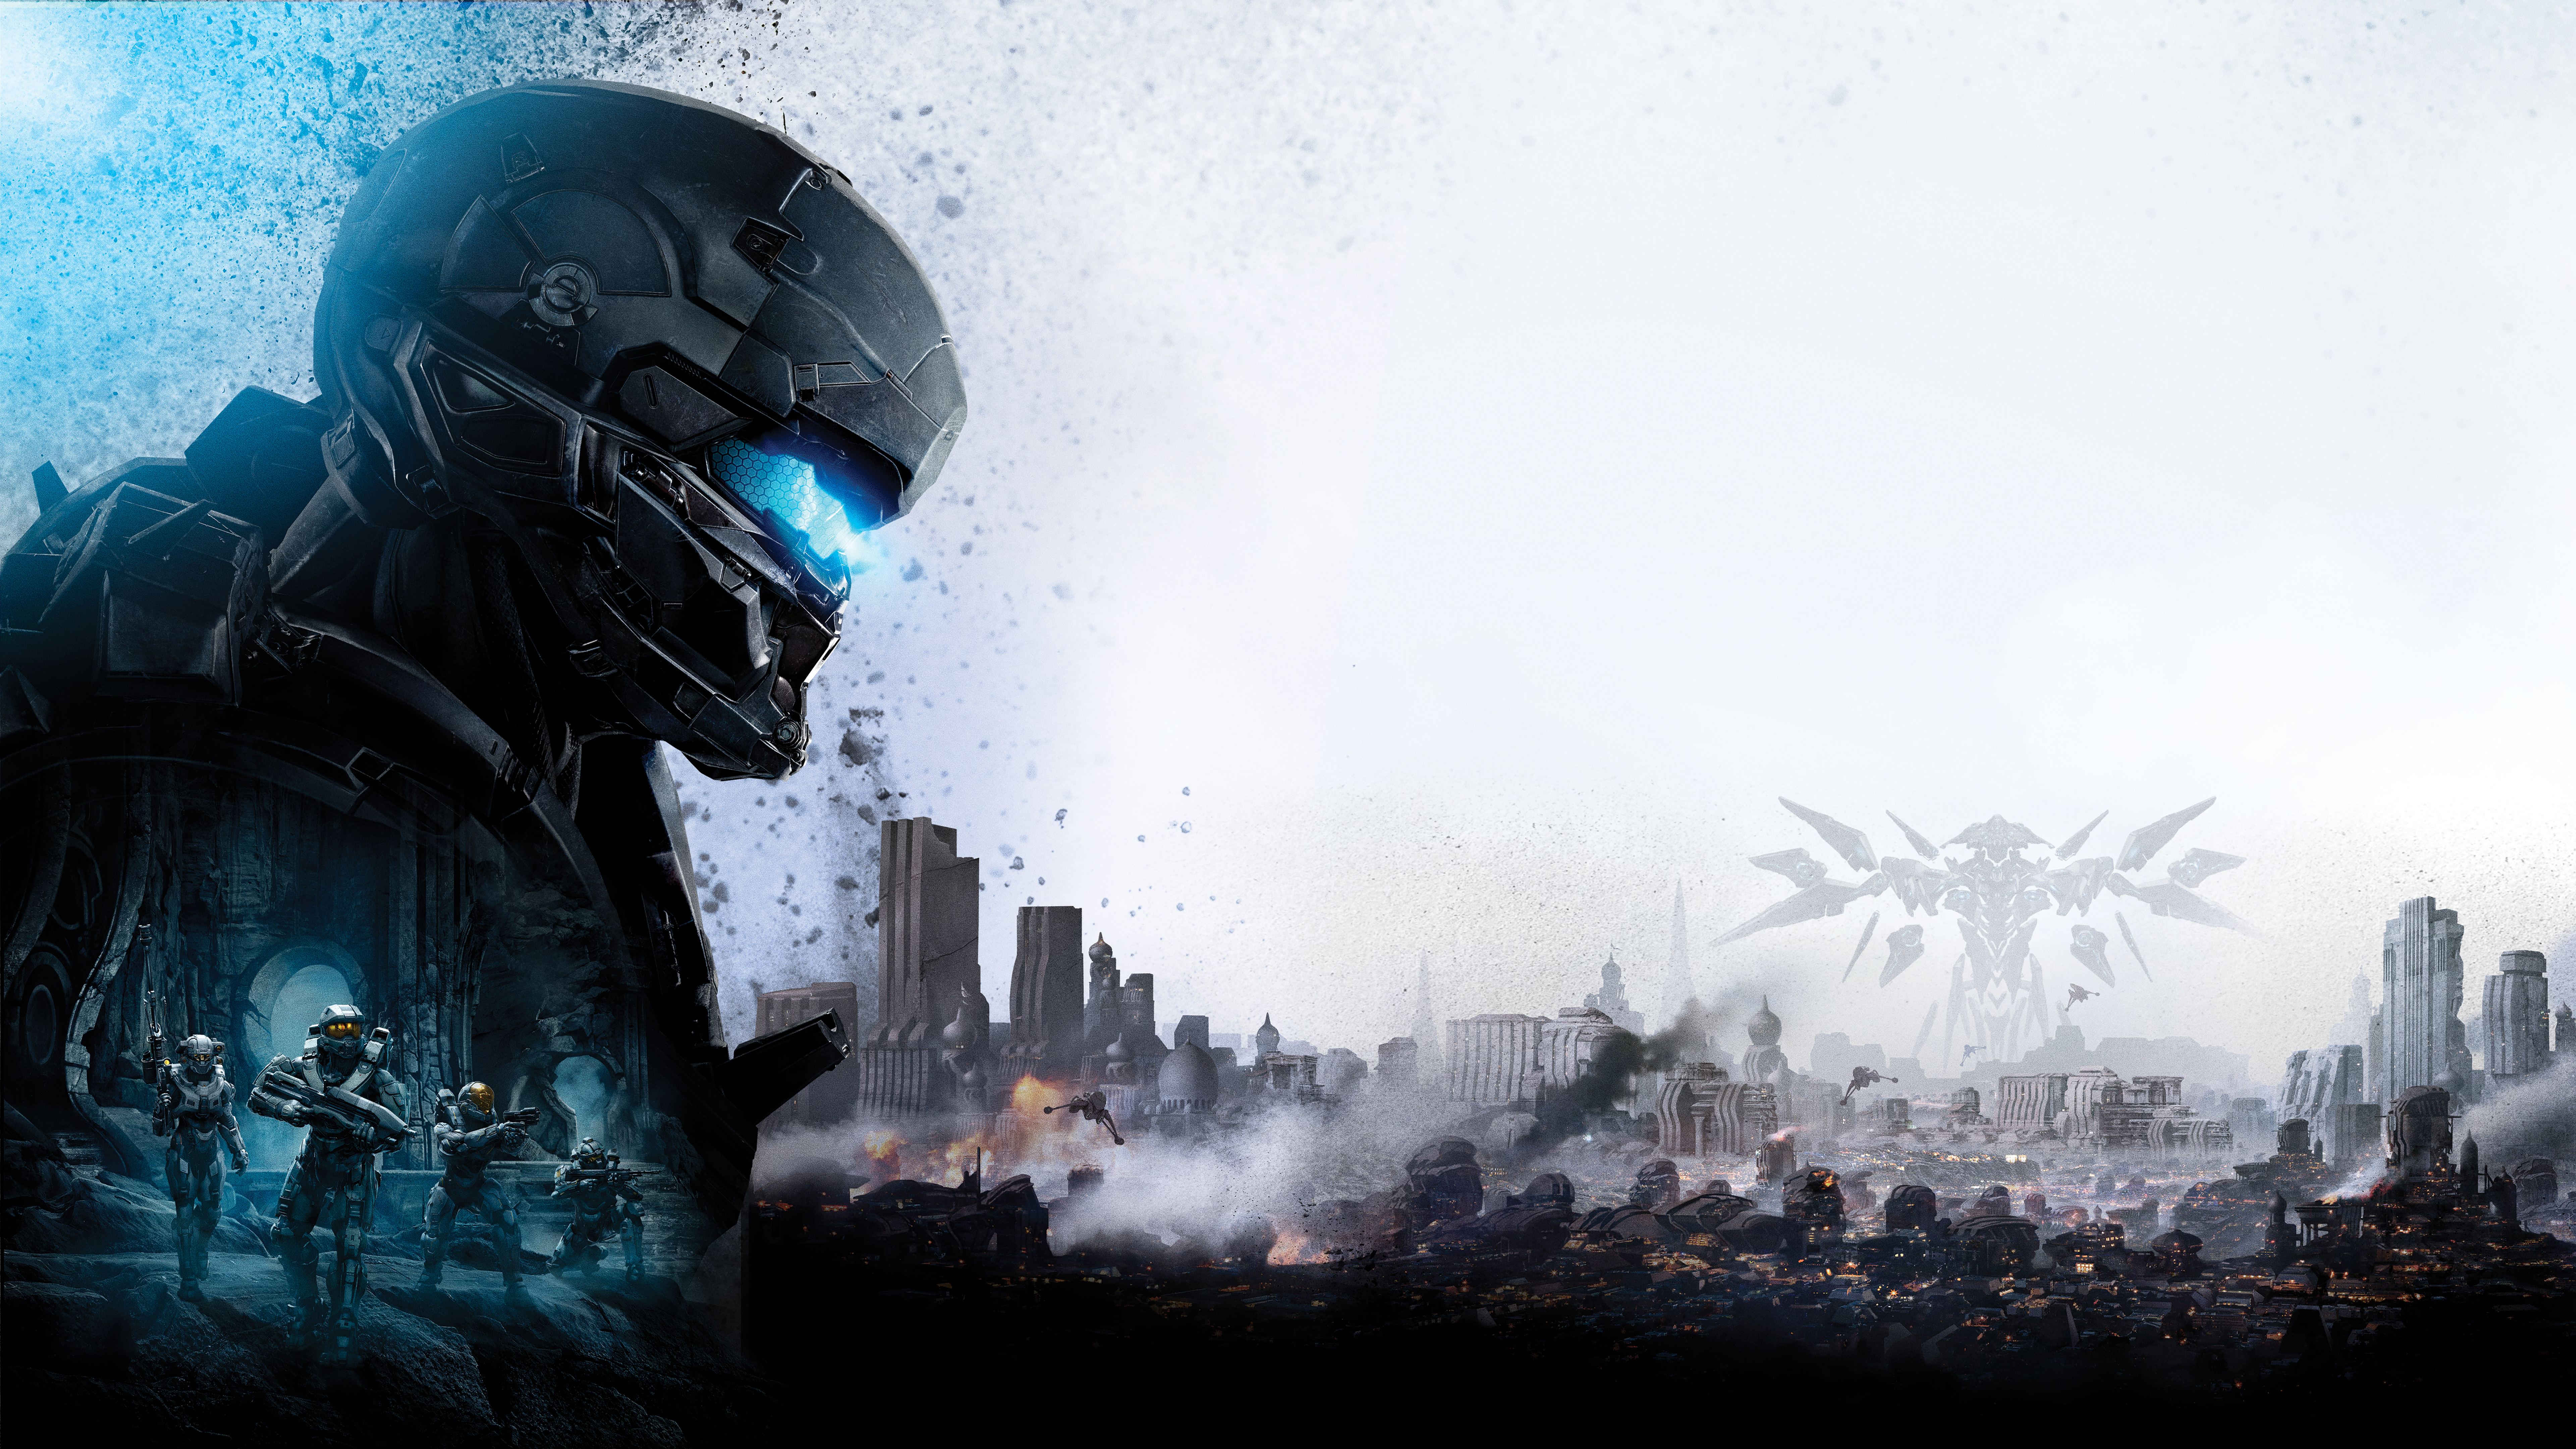 Halo 5: Guardians Wallpapers, Pictures, Images